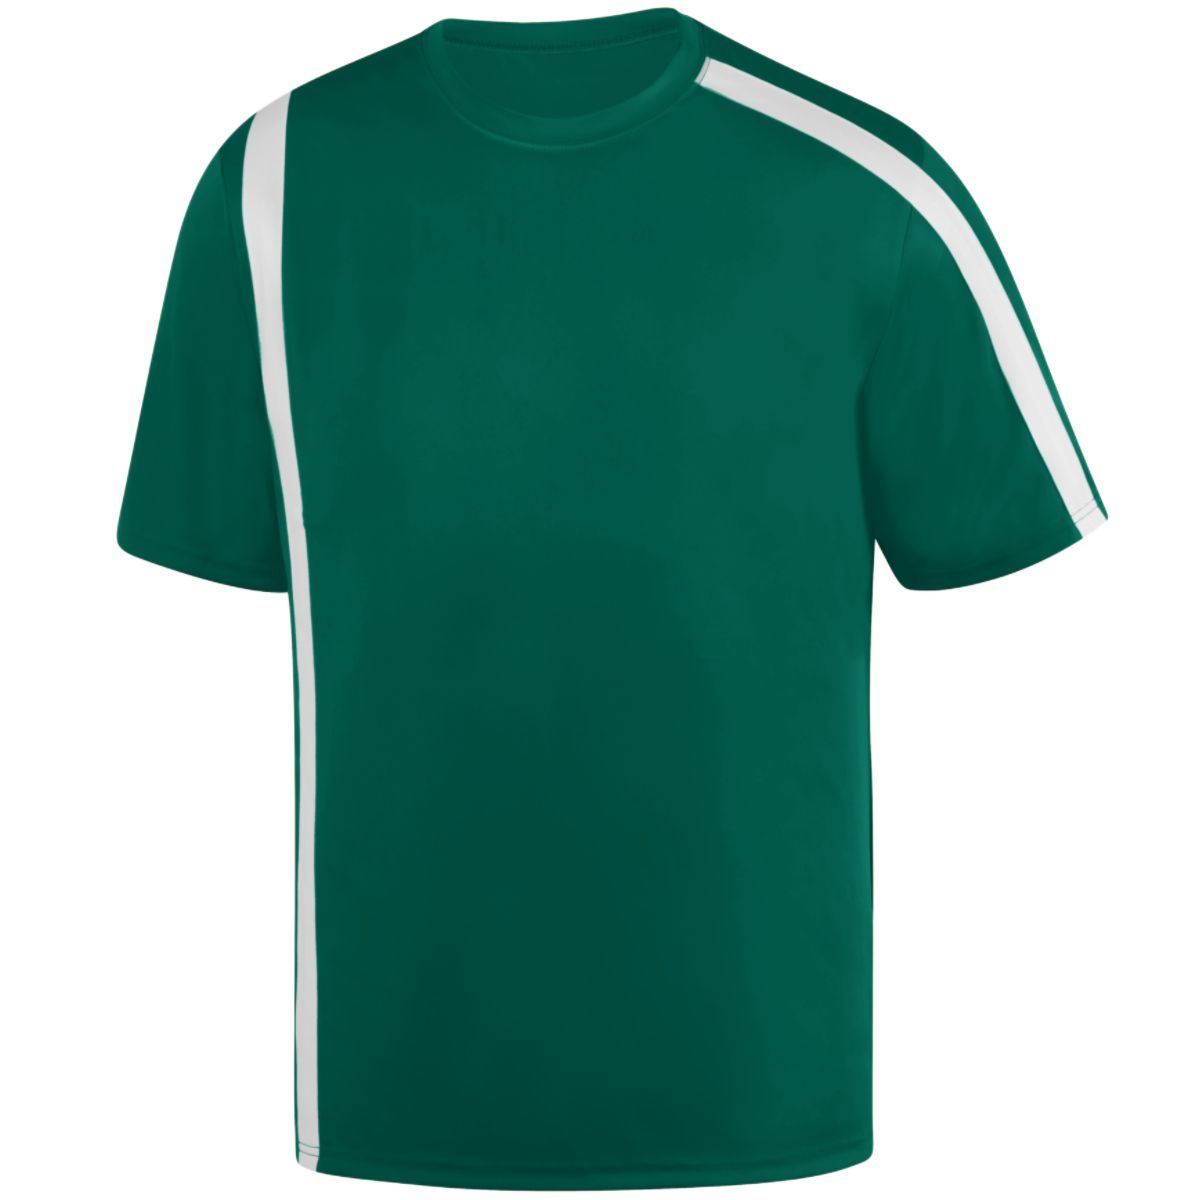 Augusta Sportswear Attacking Third Jersey in Dark Green/White  -Part of the Adult, Adult-Jersey, Augusta-Products, Soccer, Shirts, All-Sports-1 product lines at KanaleyCreations.com